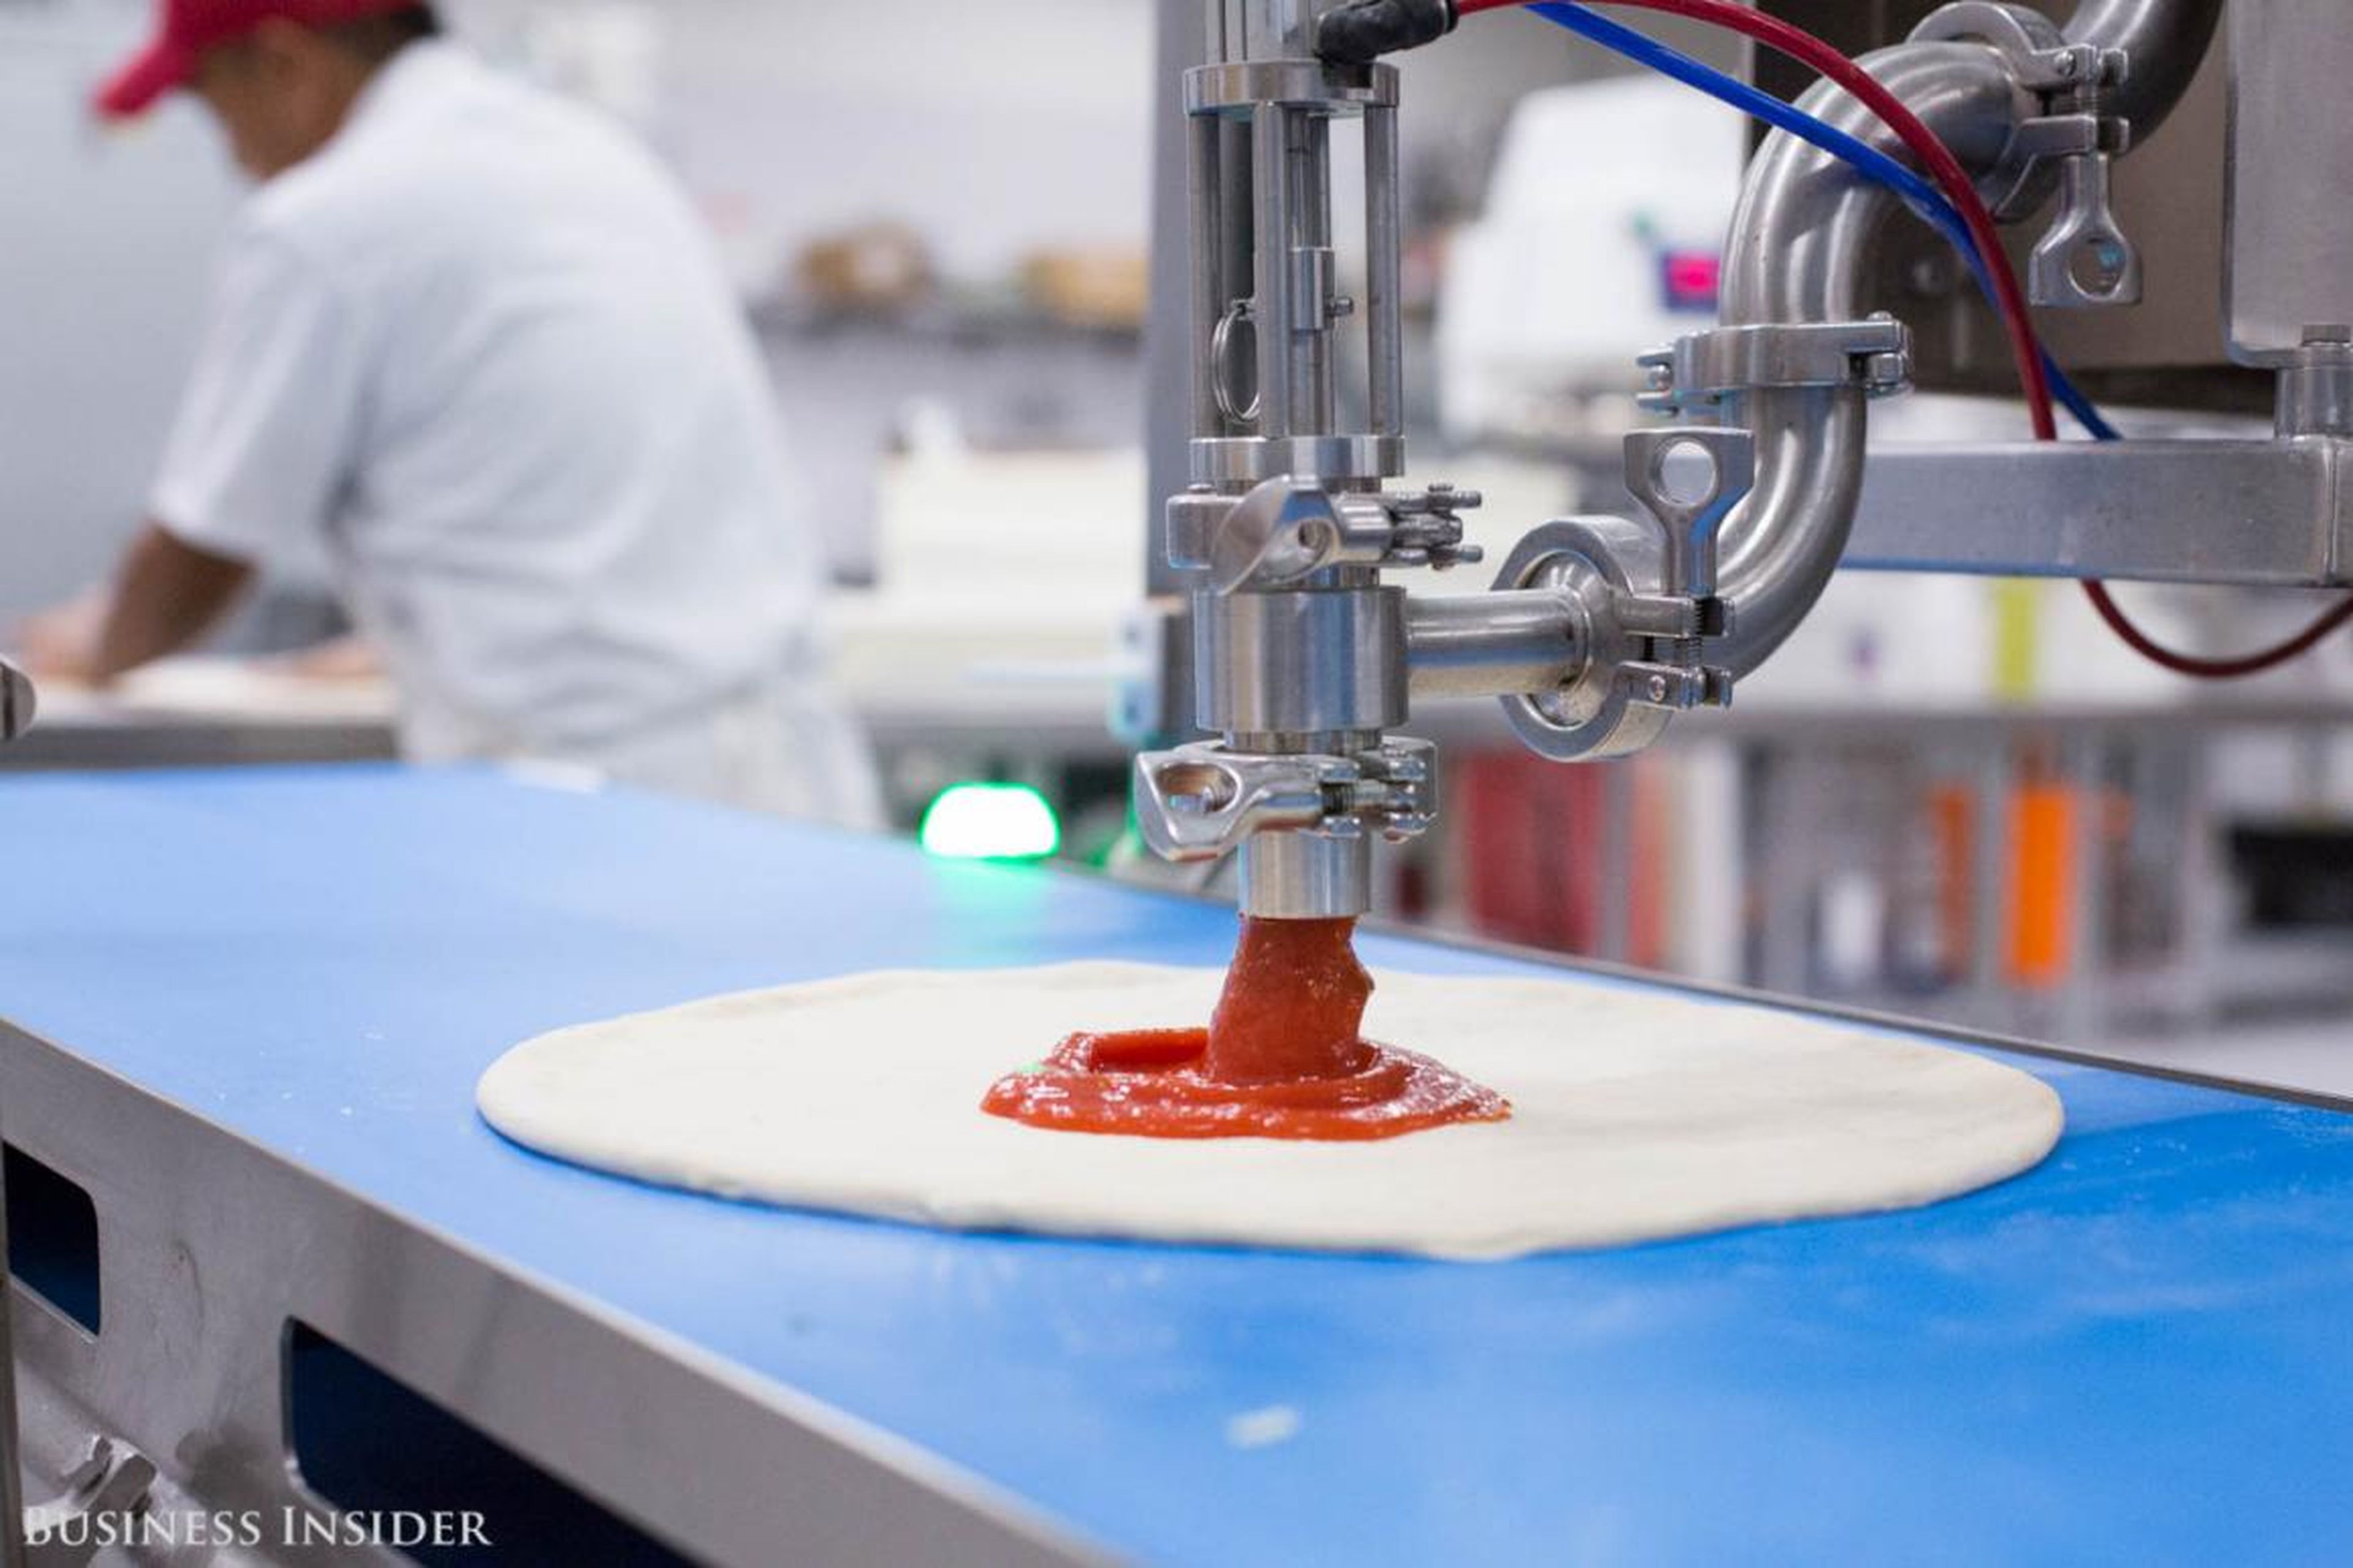 The pizza crust slides down the conveyor belt and lands under one of two sauce dispensers, named Giorgio and Pepe. They release different amounts of sauce based on the customer's order.